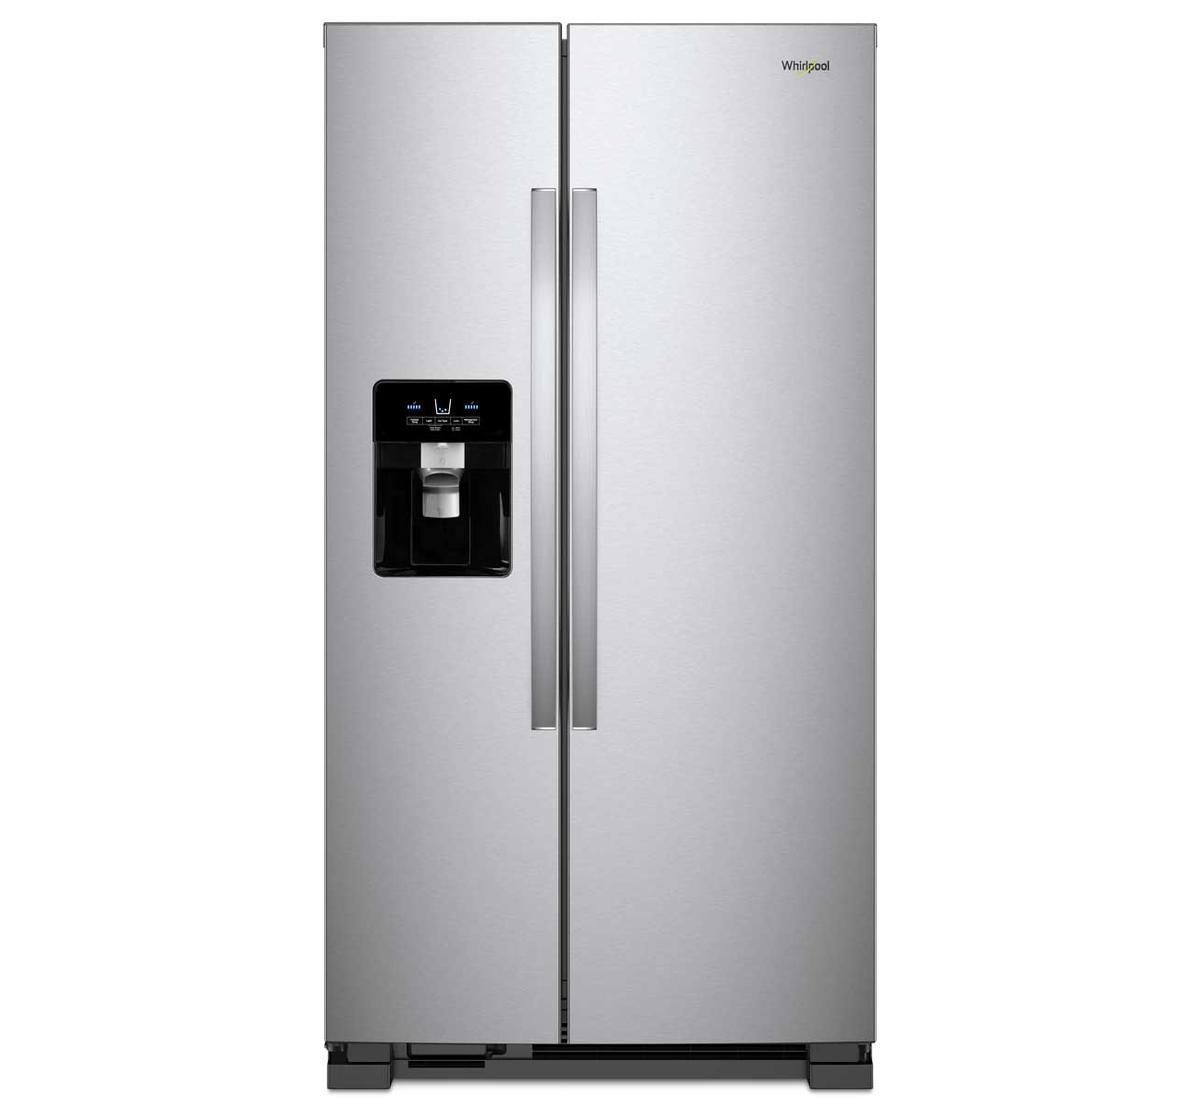 https://www.badcock.com/images/thumbs/0016996_whirlpool-side-by-side-refrigerator_1200.jpeg